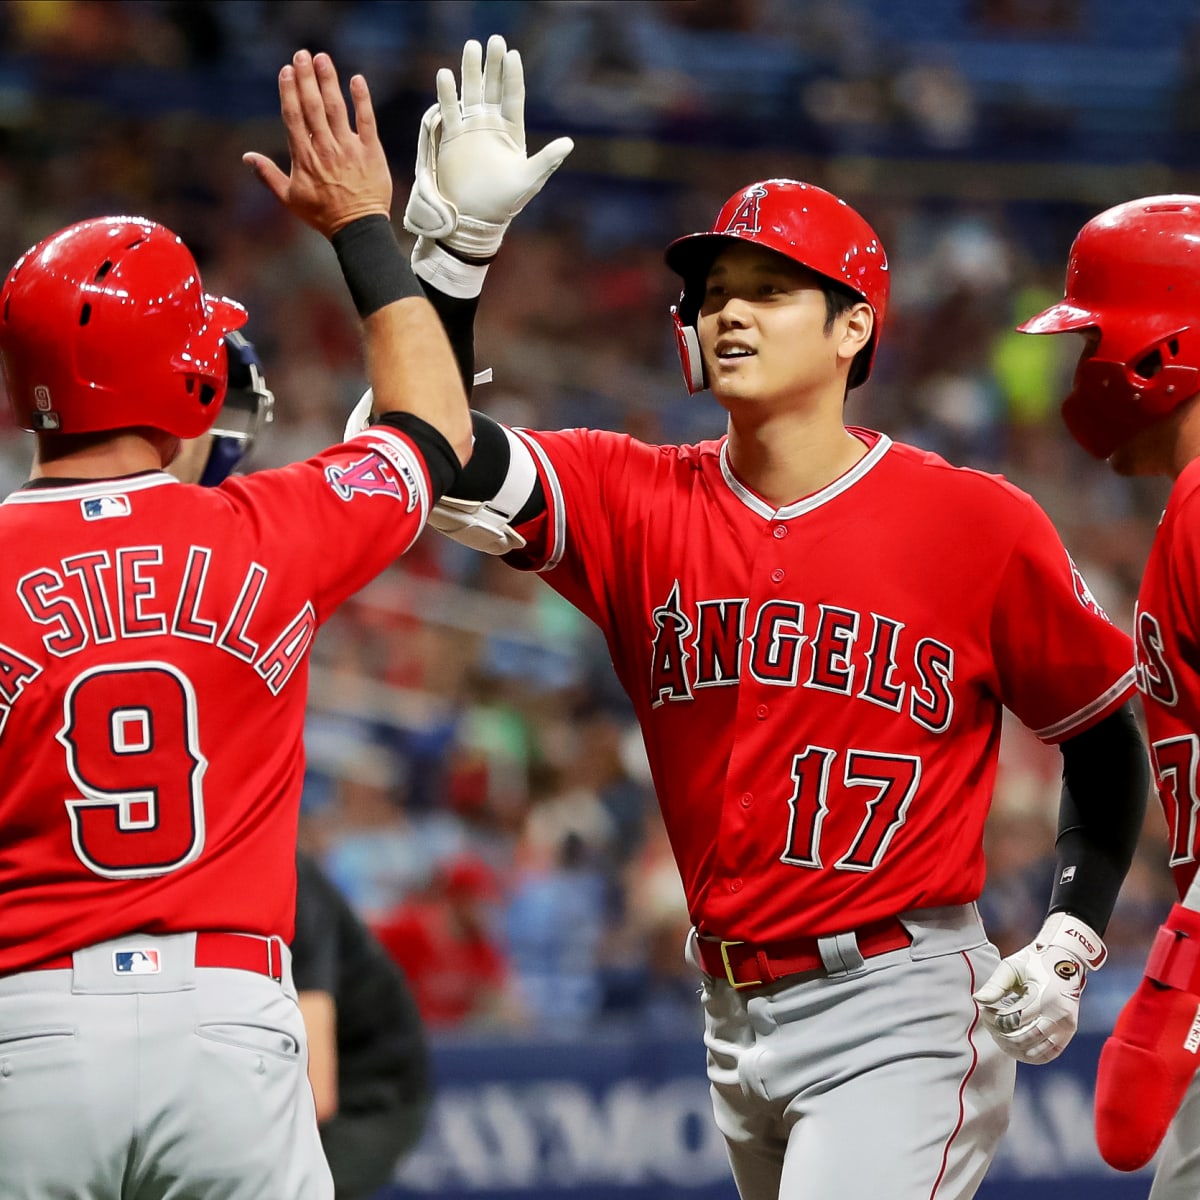 Shohei Ohtani becomes first Japanese-born MLB player to hit for cycle